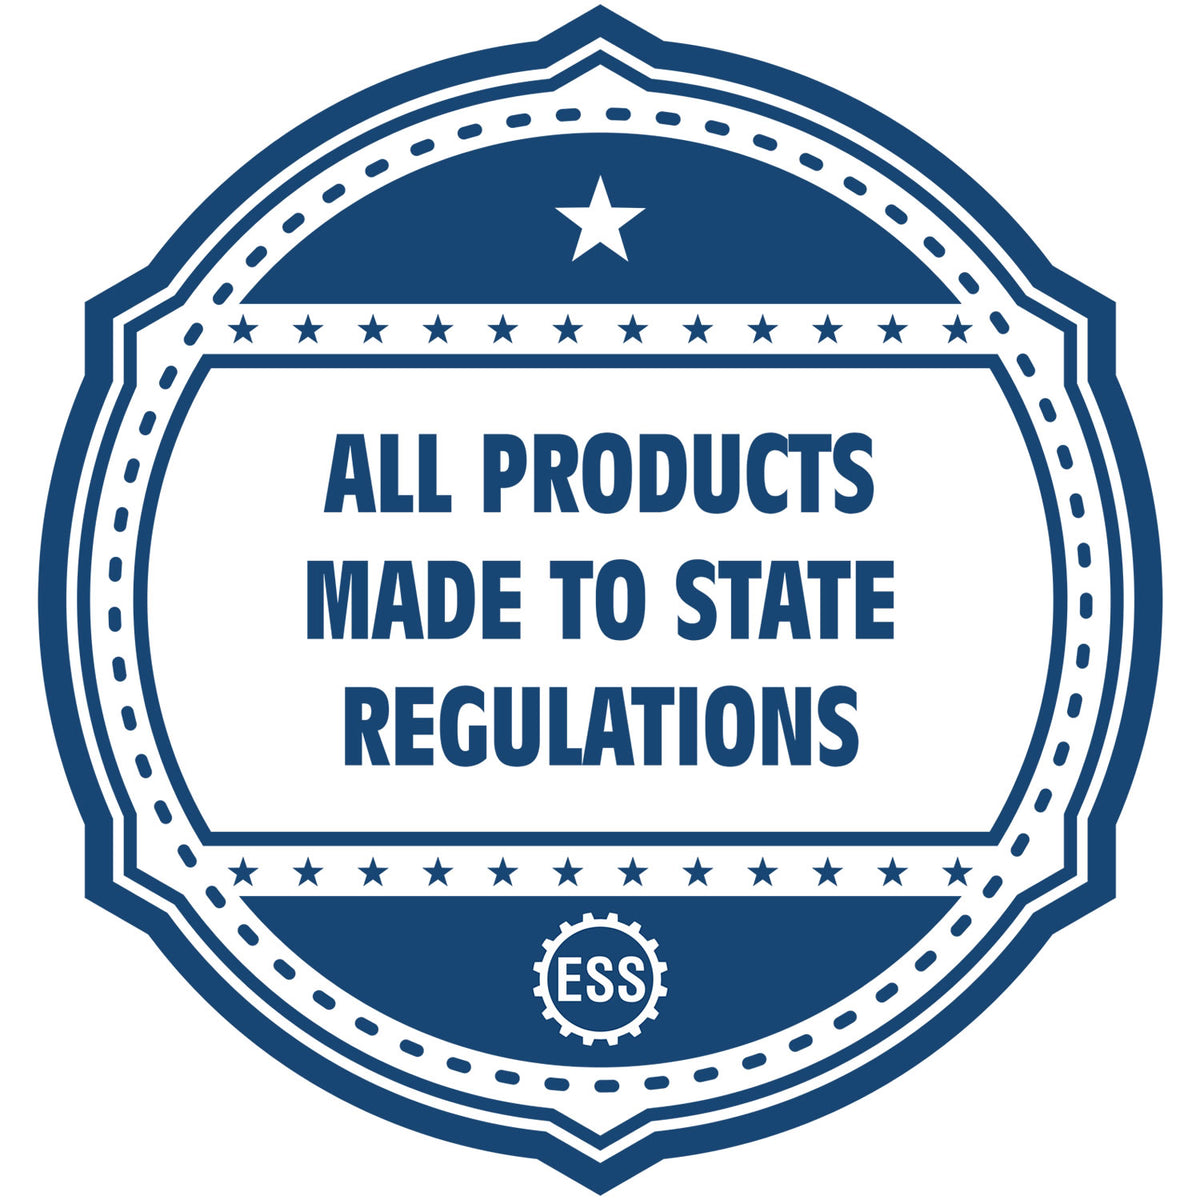 An icon or badge element for the Minnesota Engineer Desk Seal showing that this product is made in compliance with state regulations.